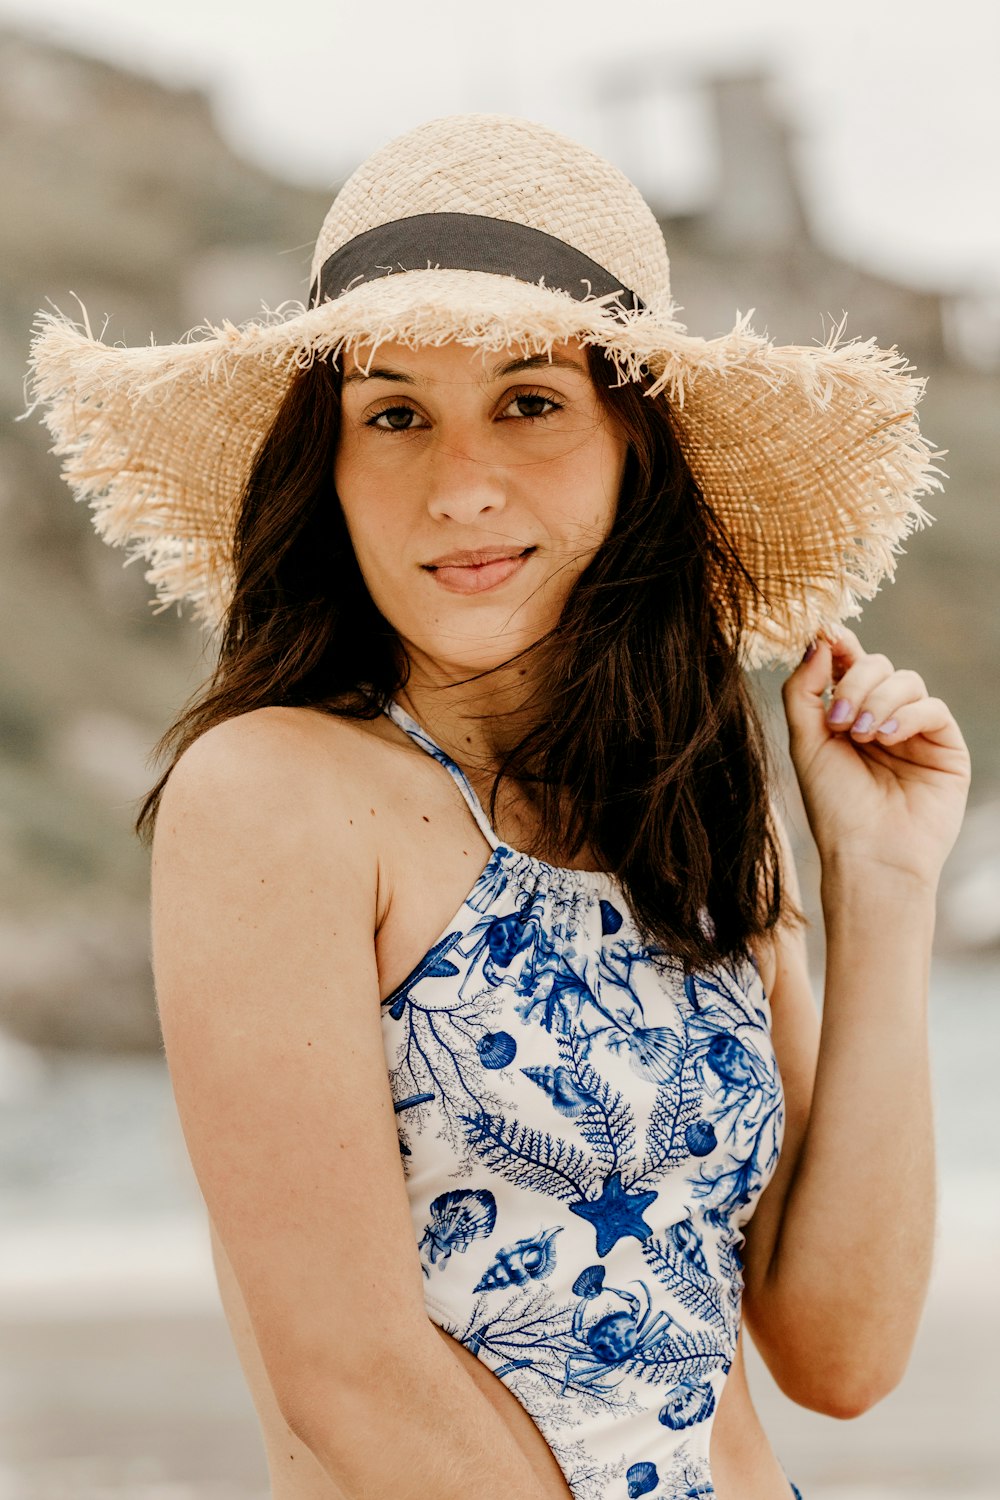 woman in blue and white floral tank top wearing brown sun hat